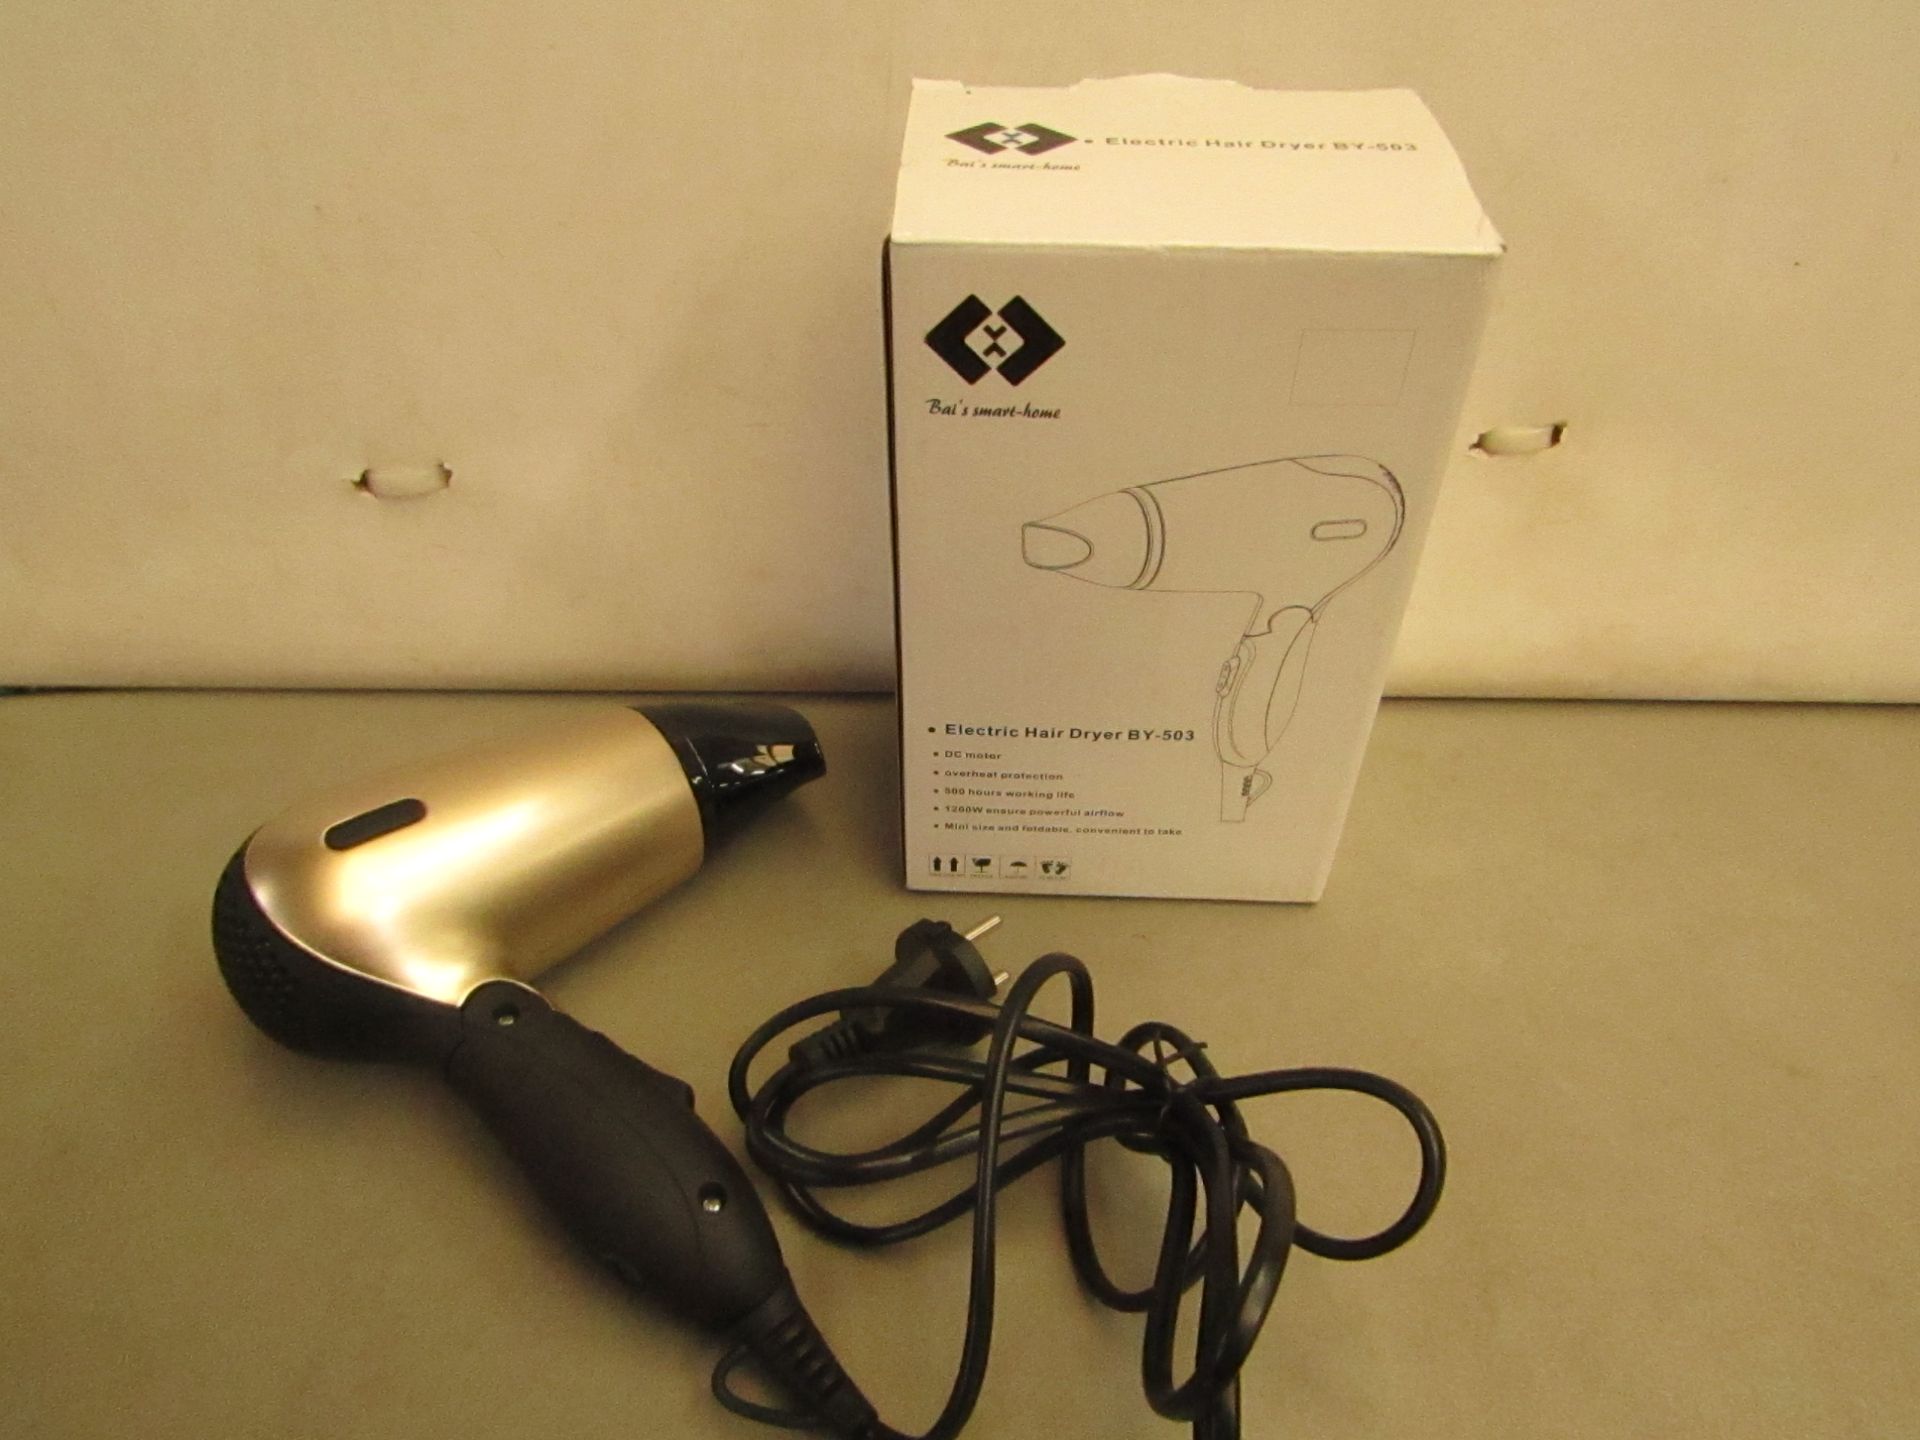 4 x Electric Travel Hair Driers. All new &Boxed but have EU plugs on them so will need UK adapters.